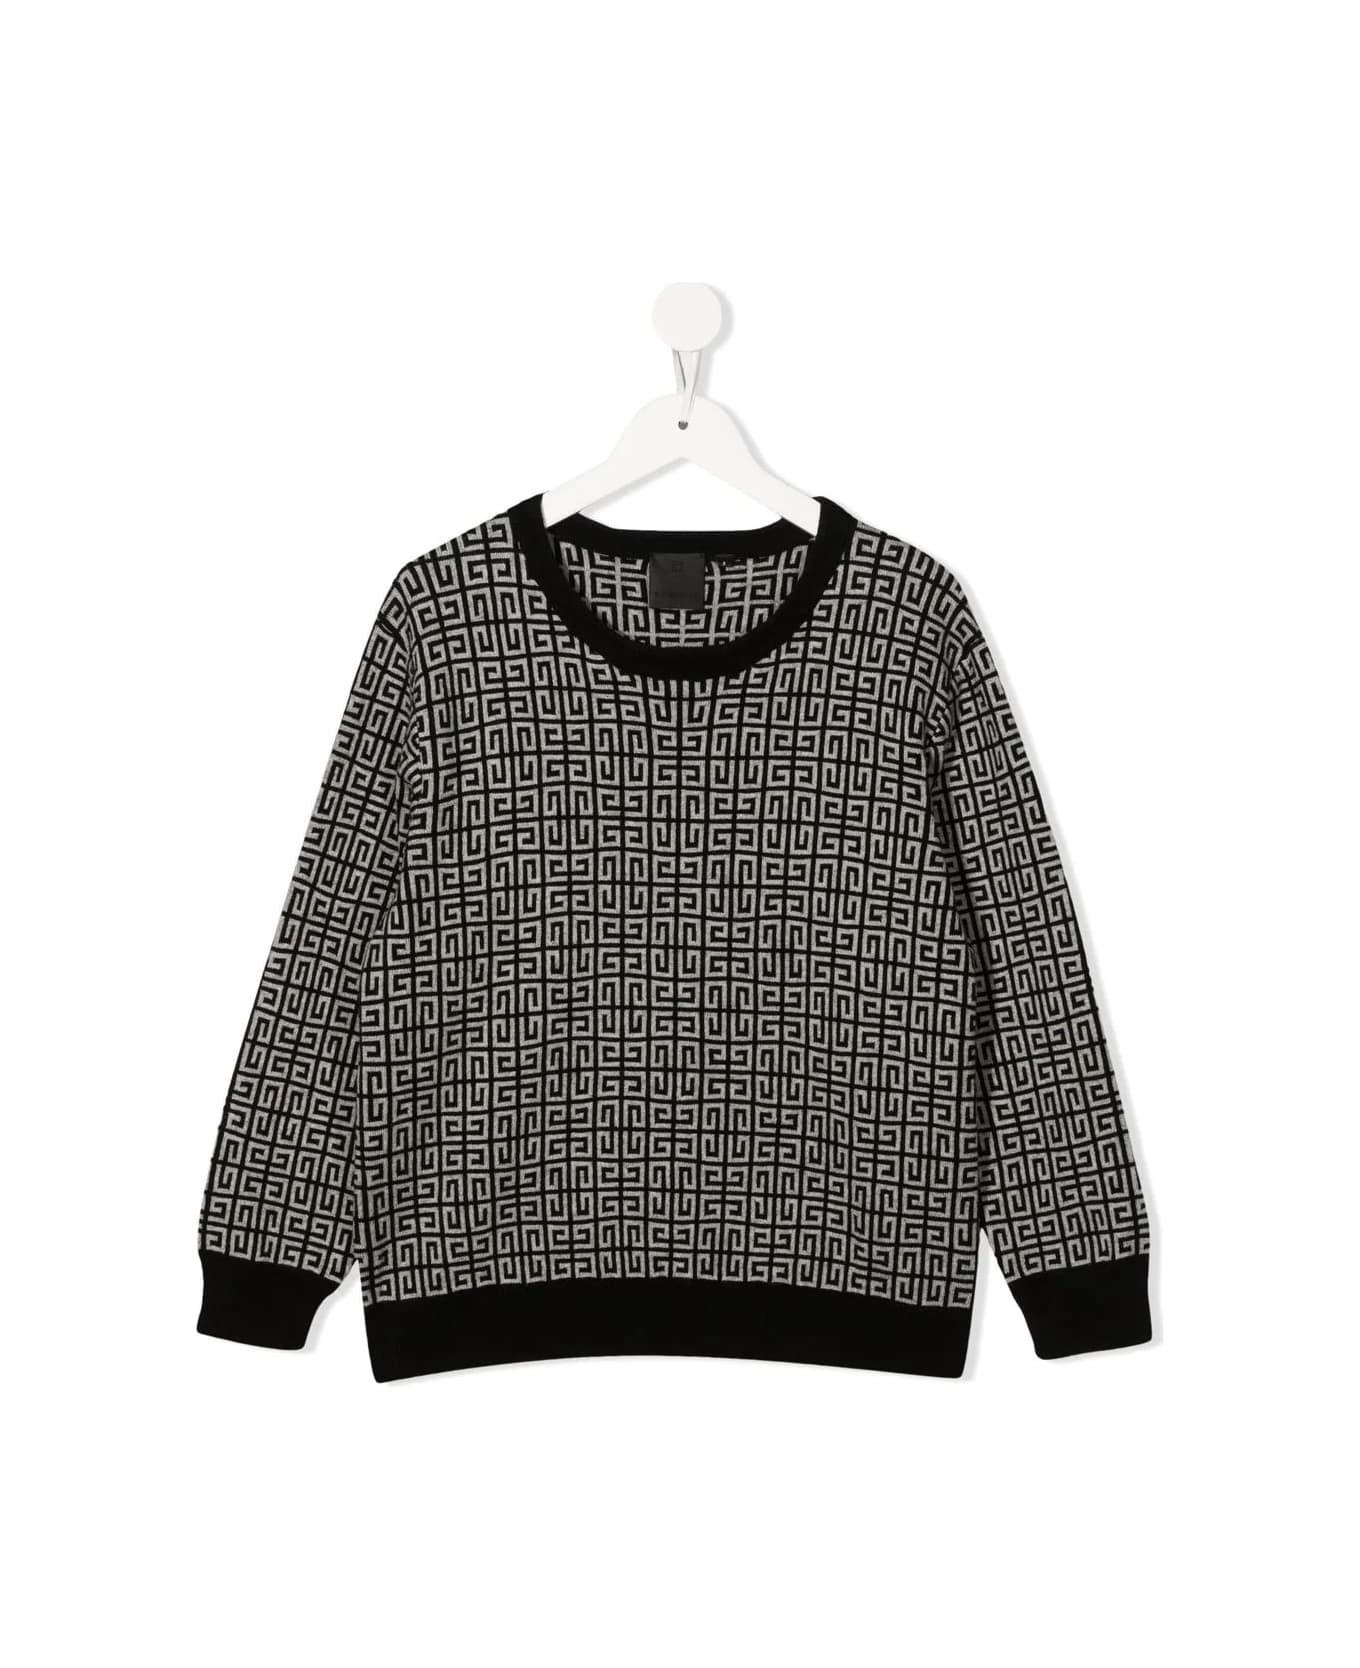 Givenchy Black And Grey Sweater With All-over 4g Motif - Nero/grigio ニットウェア＆スウェットシャツ